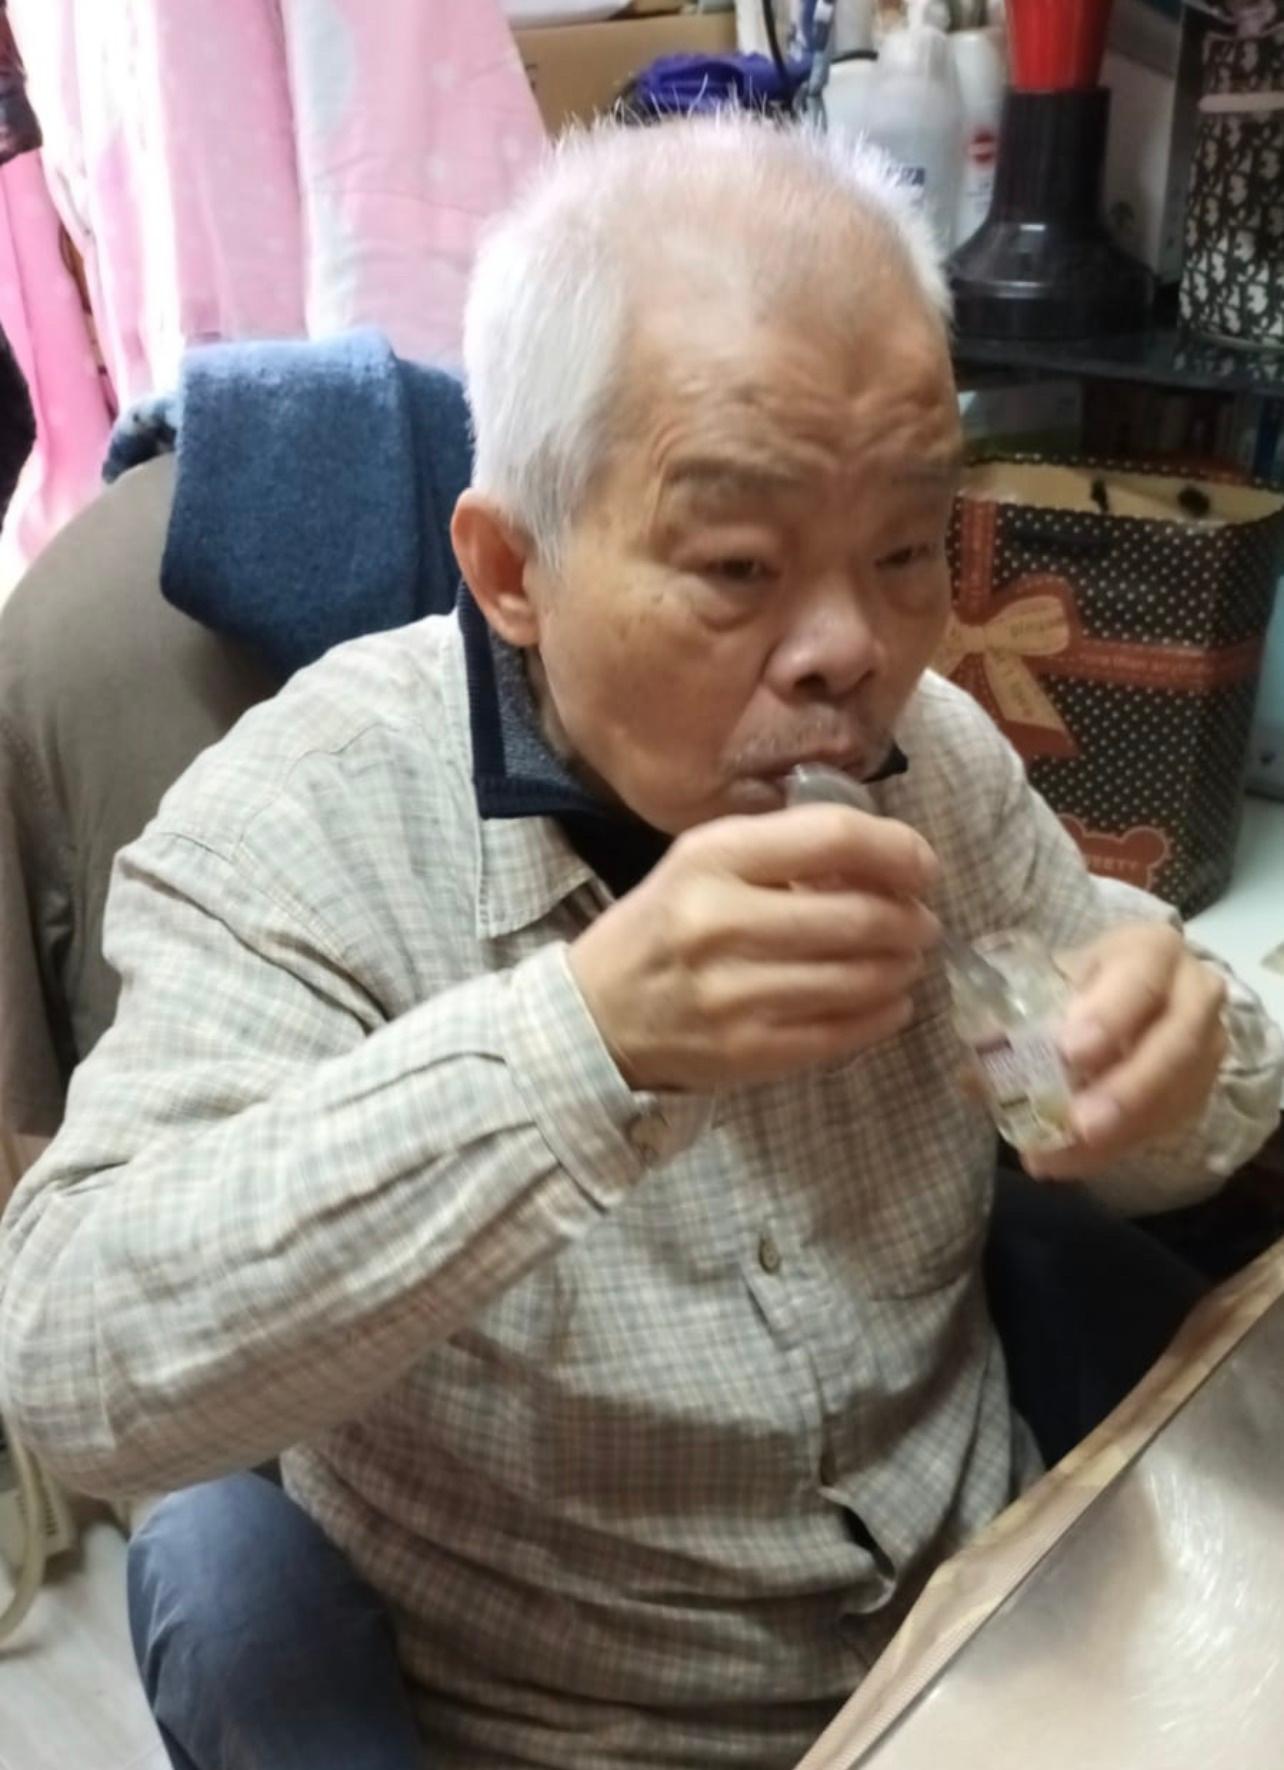 Cheung Ka-ming, aged 77, is about 1.7 metres tall, 63 kilograms in weight and of medium build. He has a round face with yellow complexion and short white hair. He was last seen wearing a light-coloured plaid shirt, black trousers and black shoes.